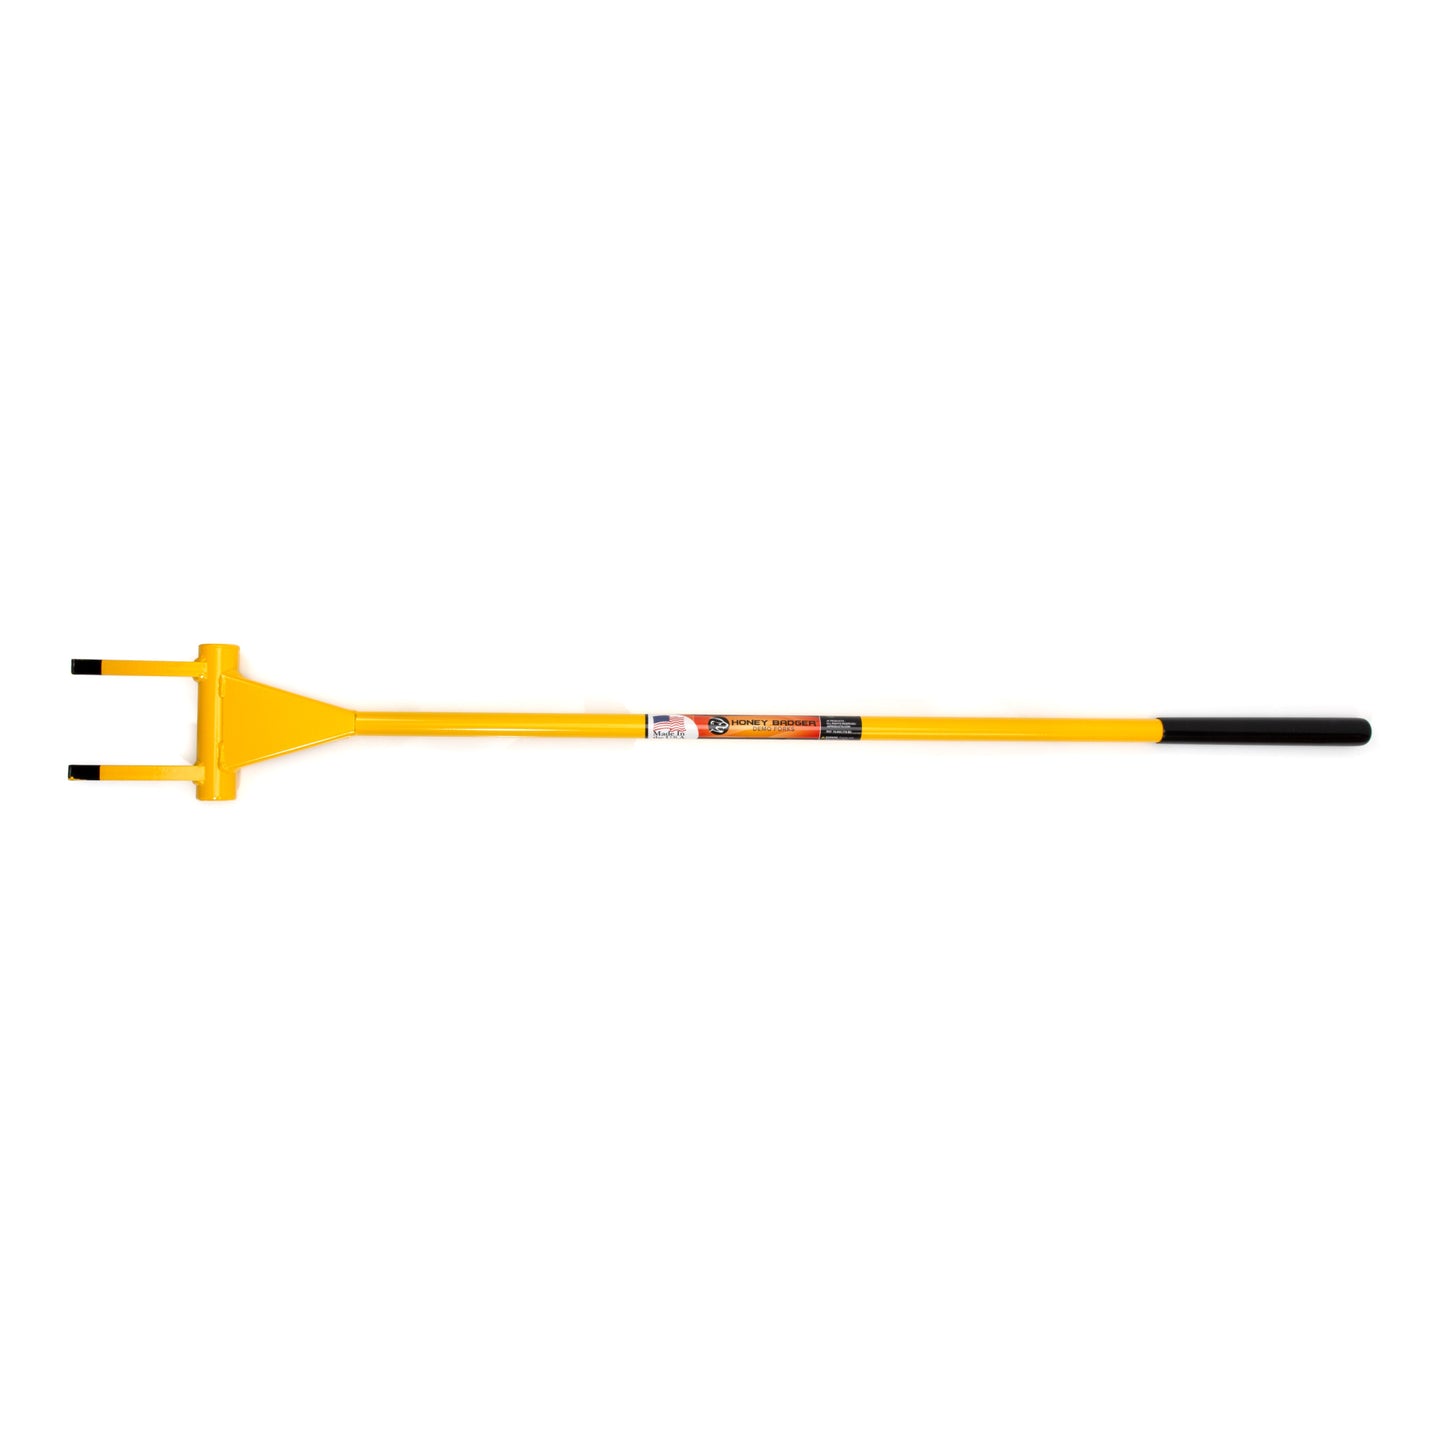 2-Tine Honey Badger Demo Fork with 56-Inch Handle